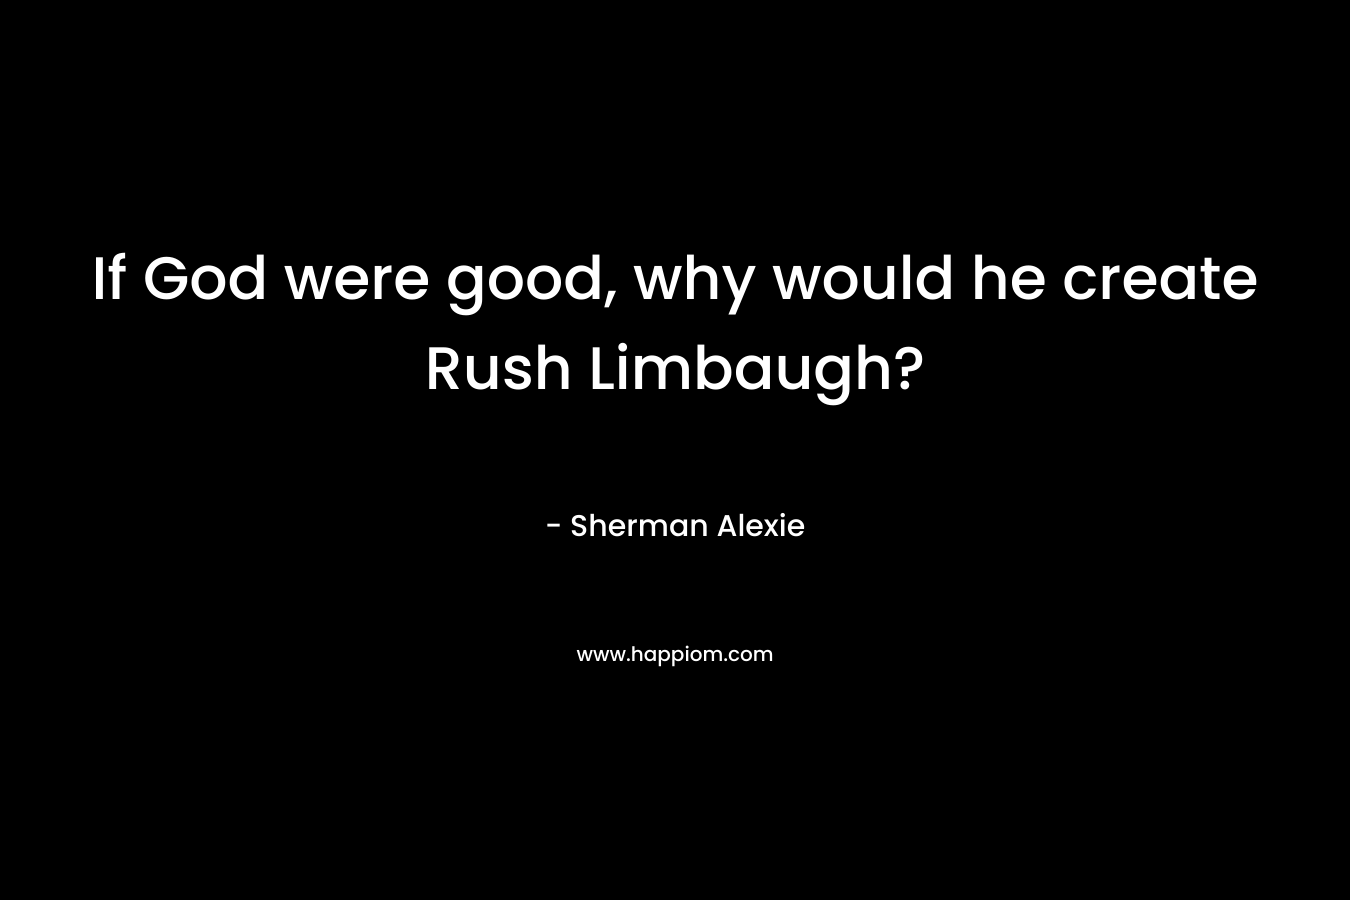 If God were good, why would he create Rush Limbaugh? – Sherman Alexie